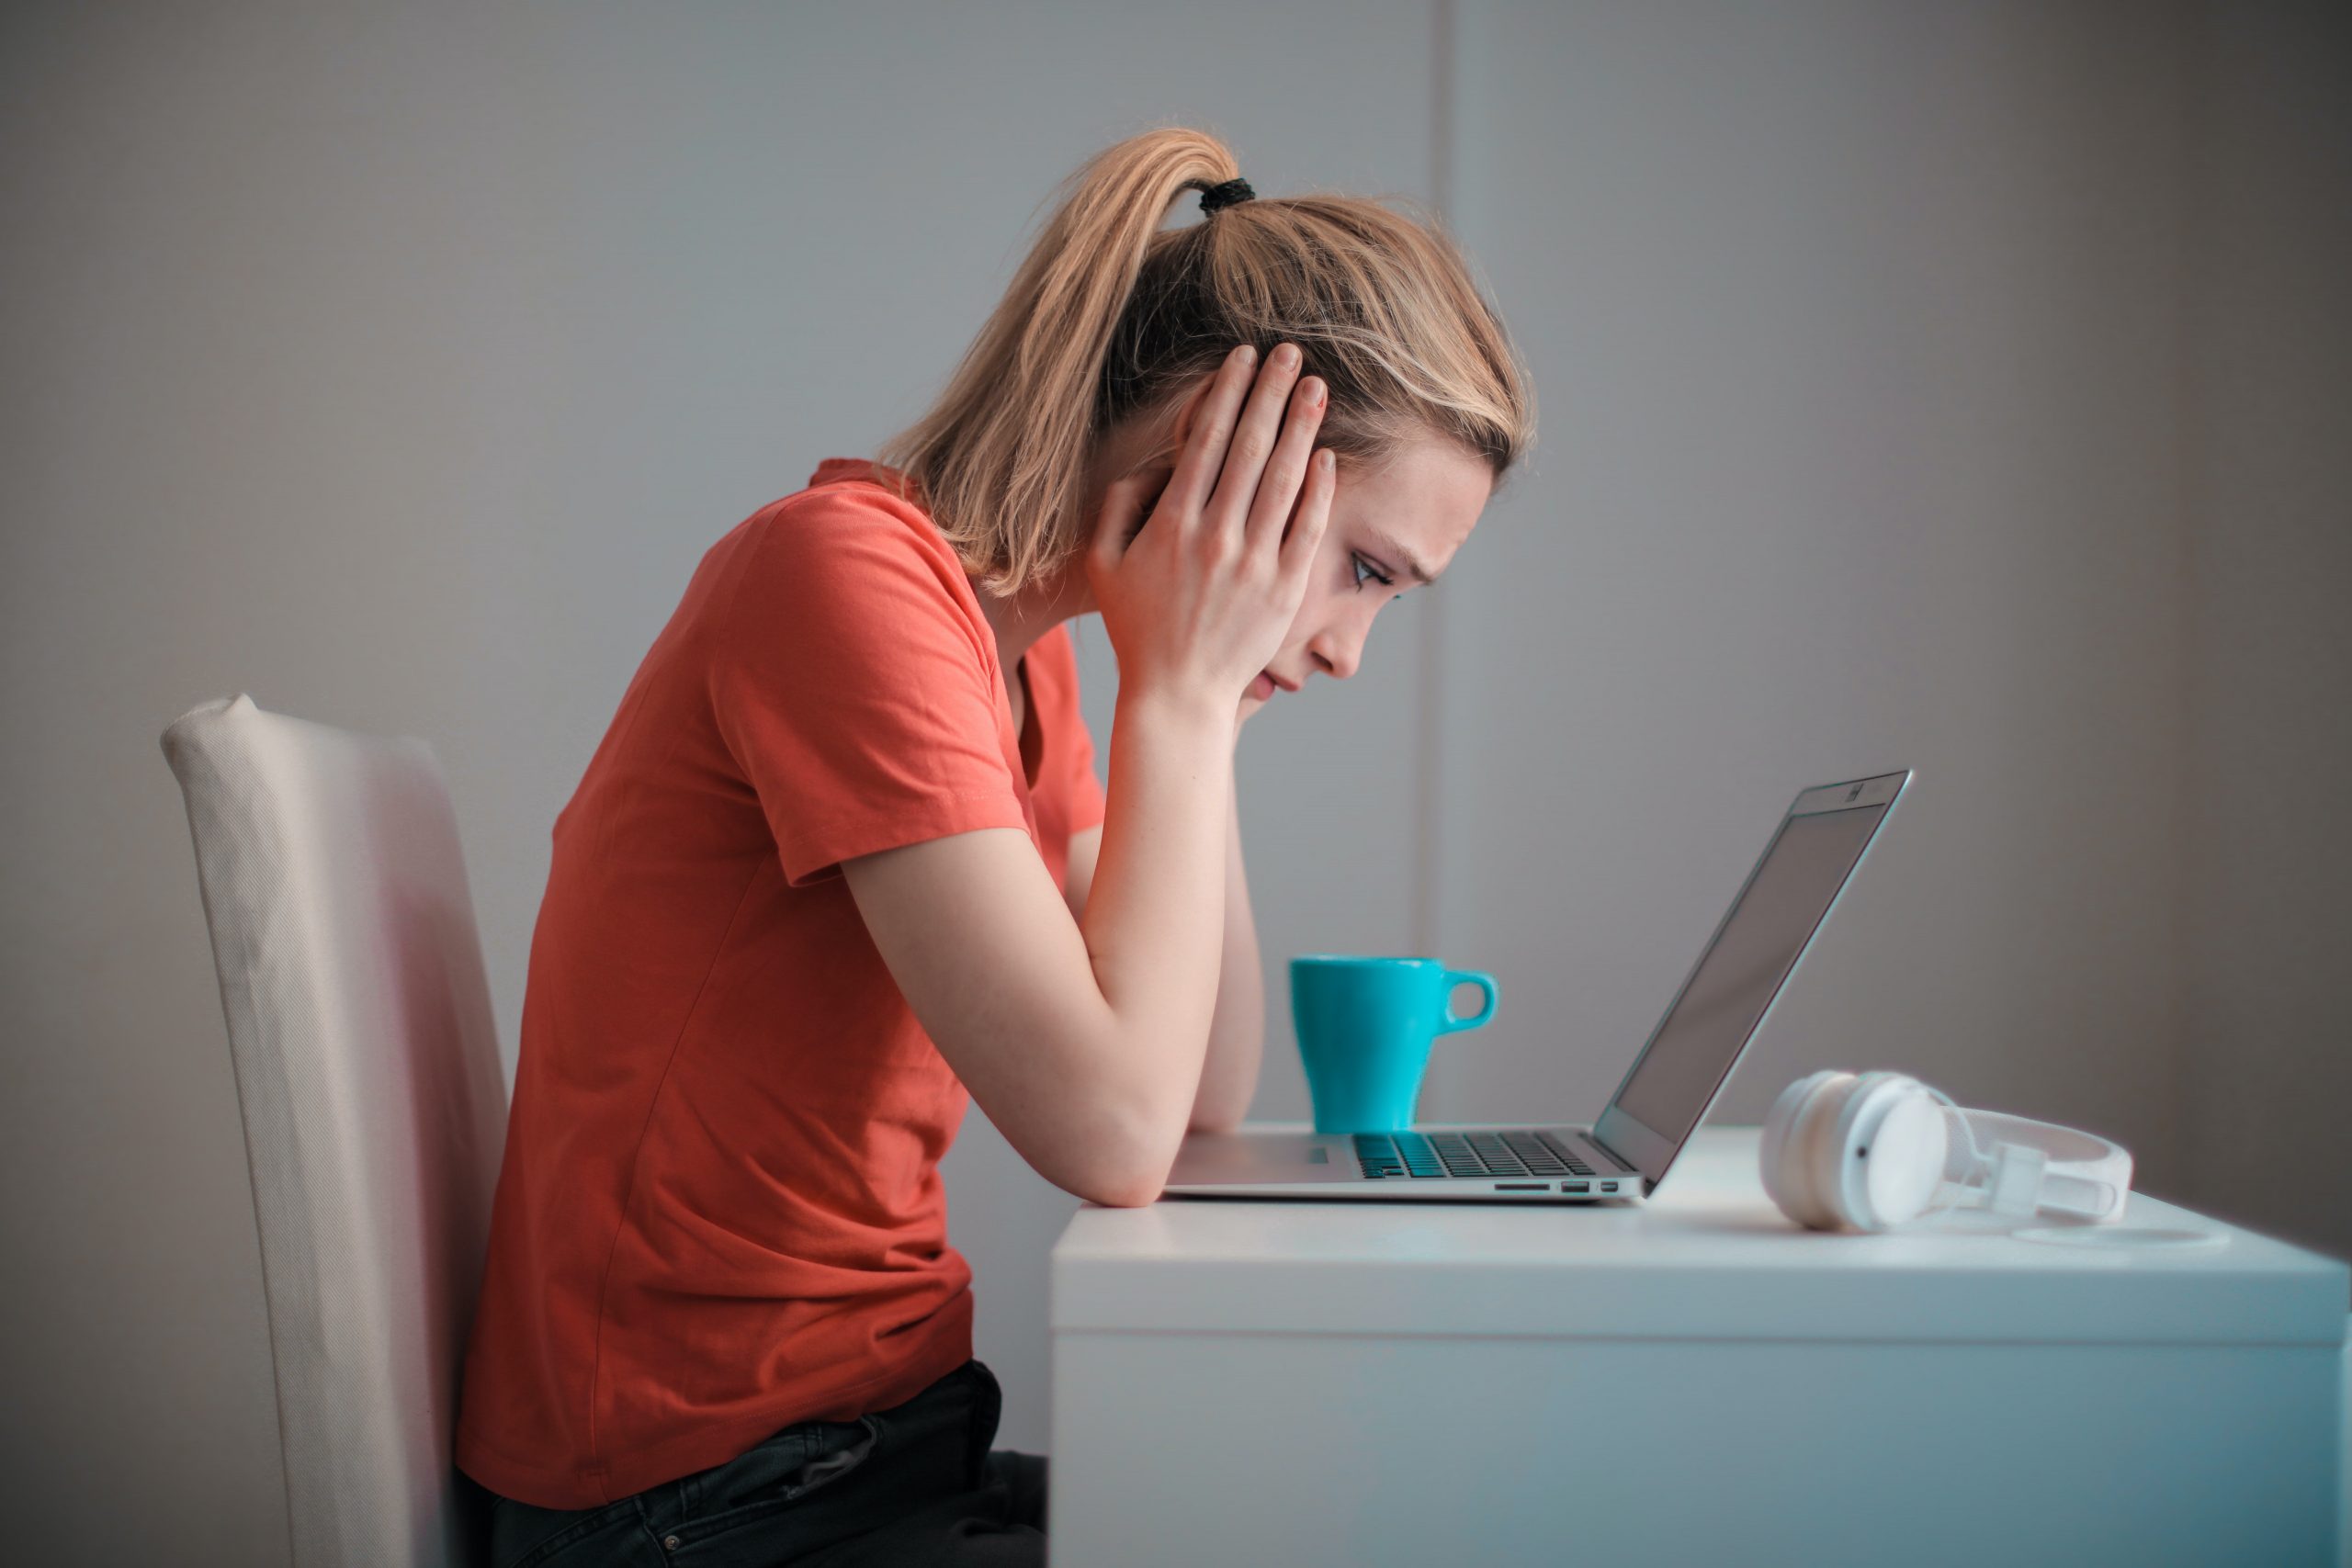 Stressed out Woman in Red T-shirt Looking at Her Laptop